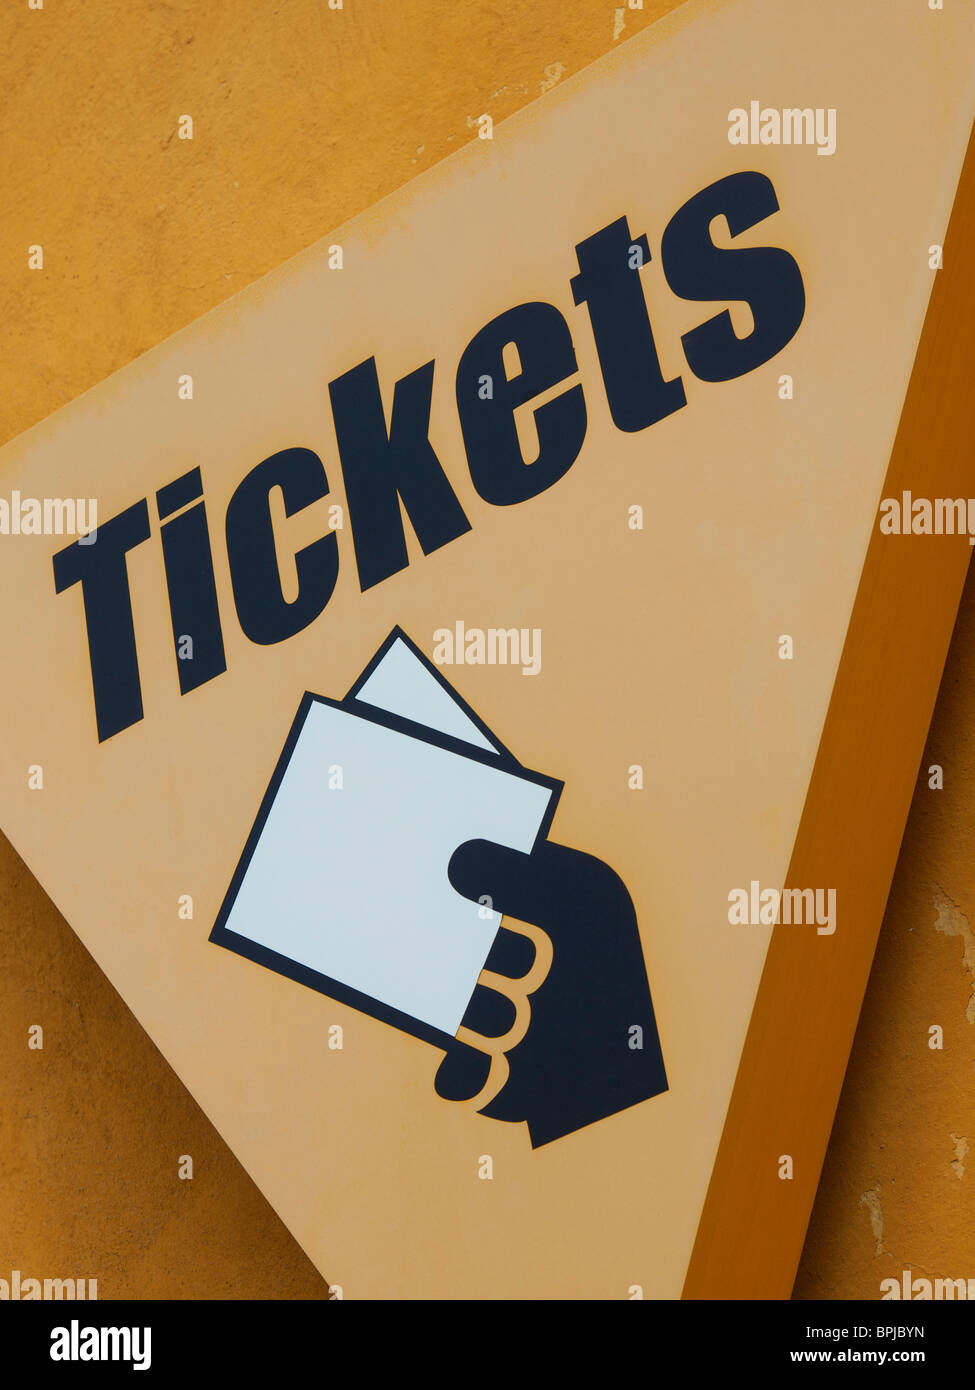 Yellow tickets sign with pictogram Stock Photo